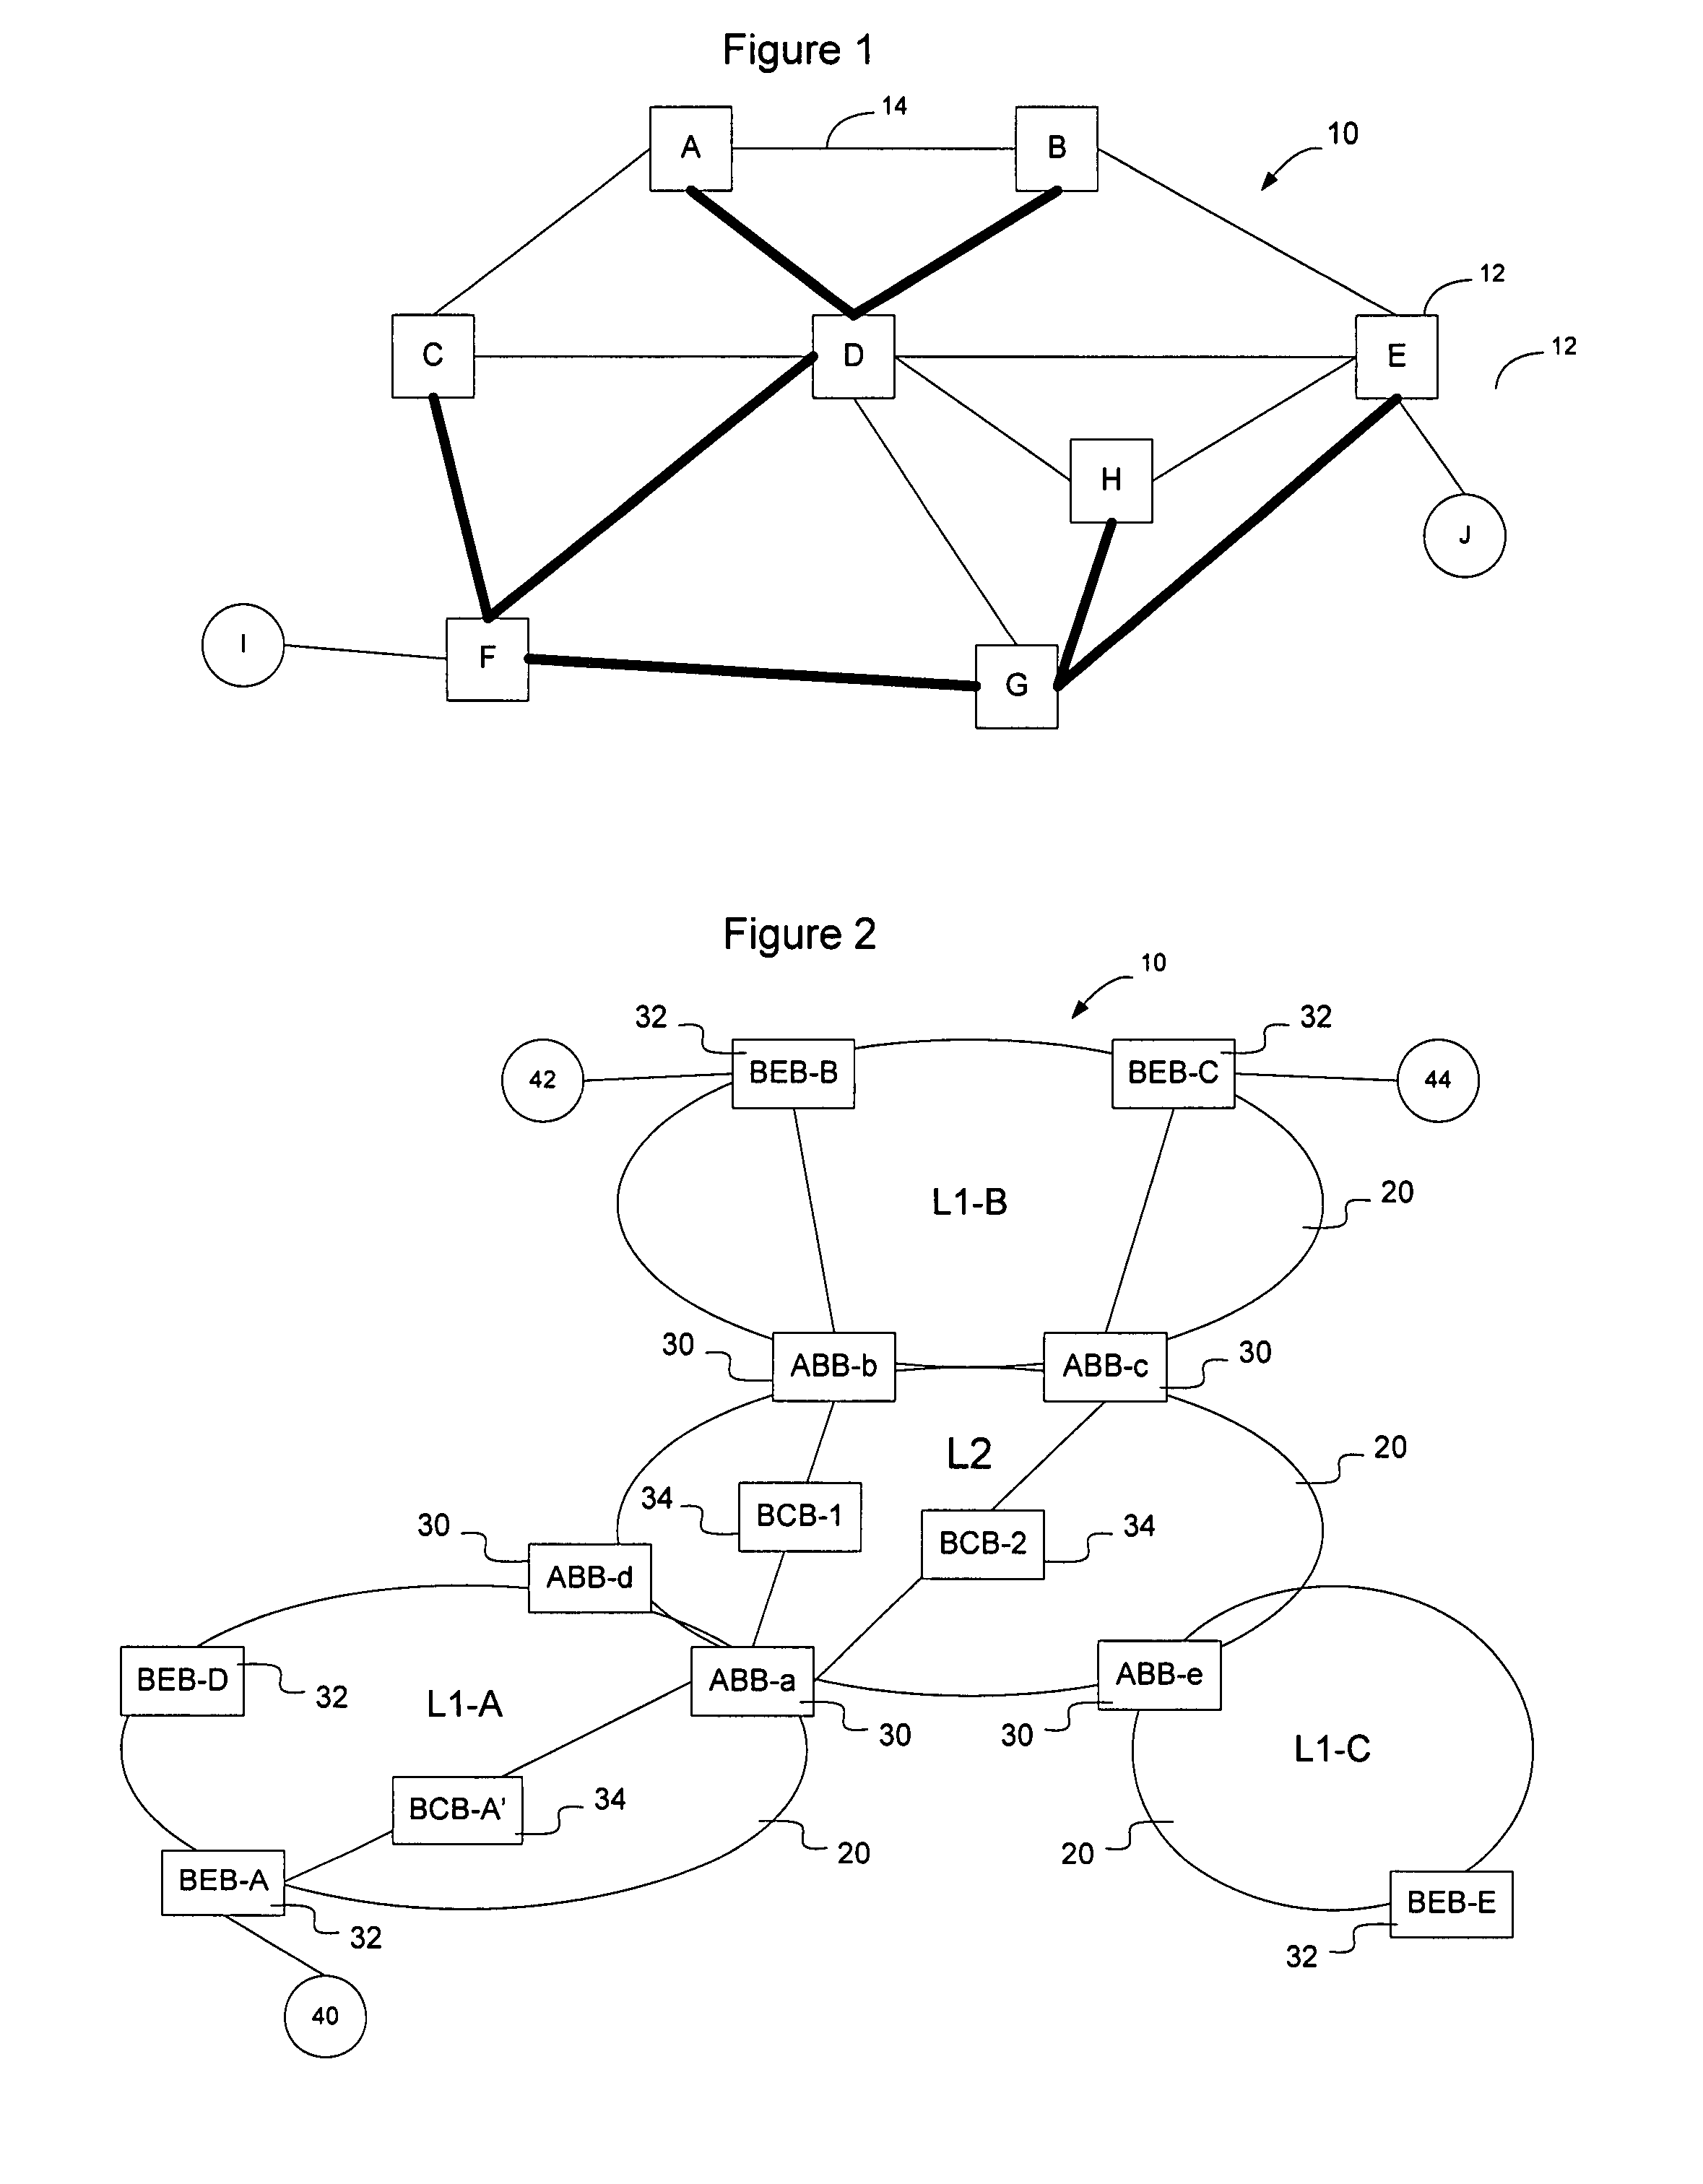 Method and apparatus for exchanging routing information and the establishment of connectivity across multiple network areas